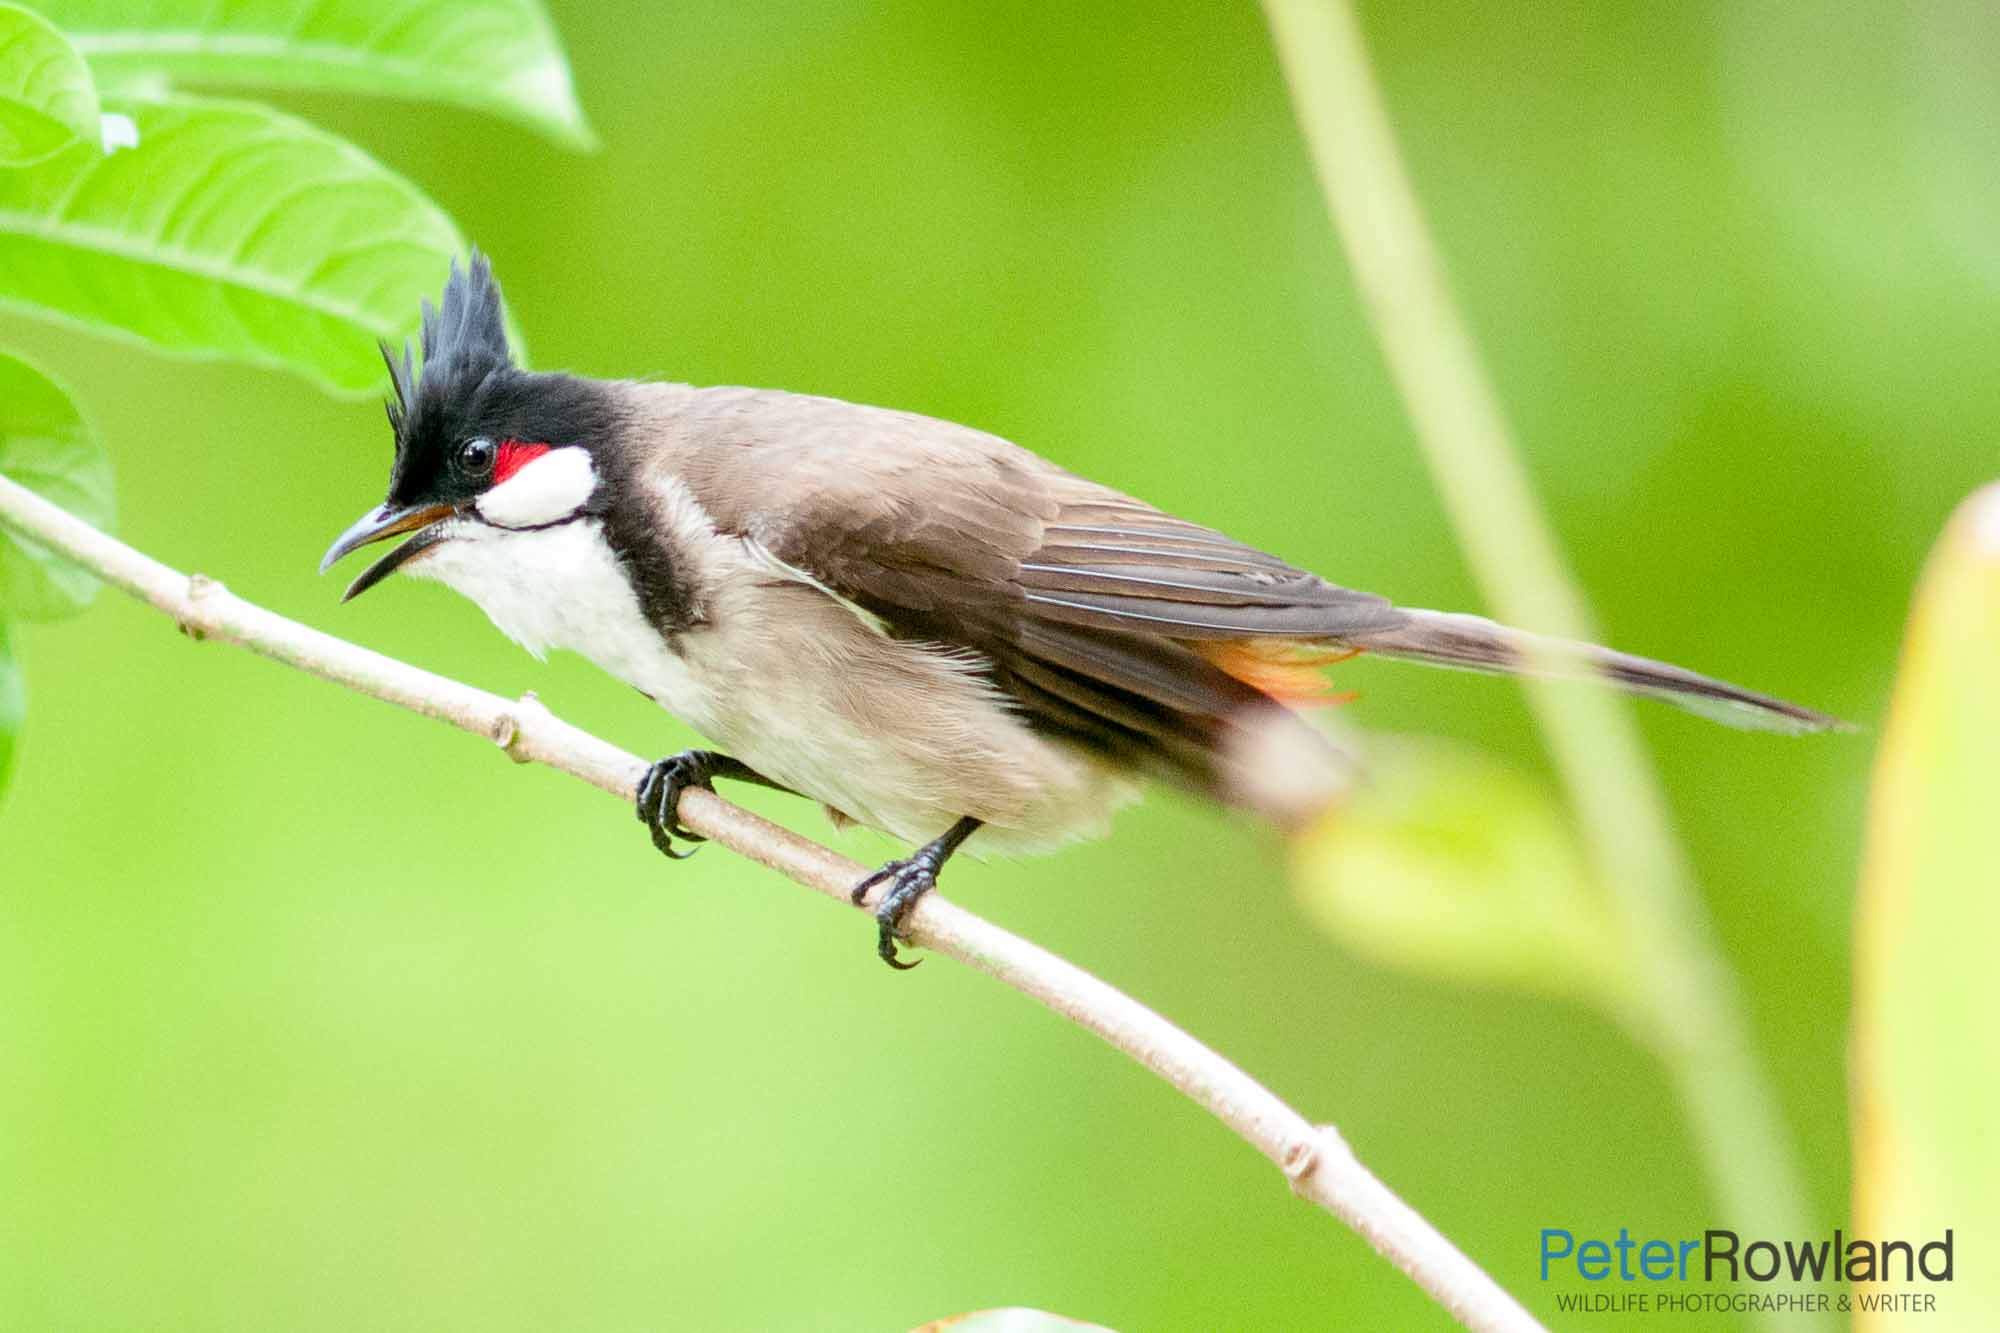 A Red-whiskered Bulbul calling out from its perch. [Photographed by Peter Rowland]